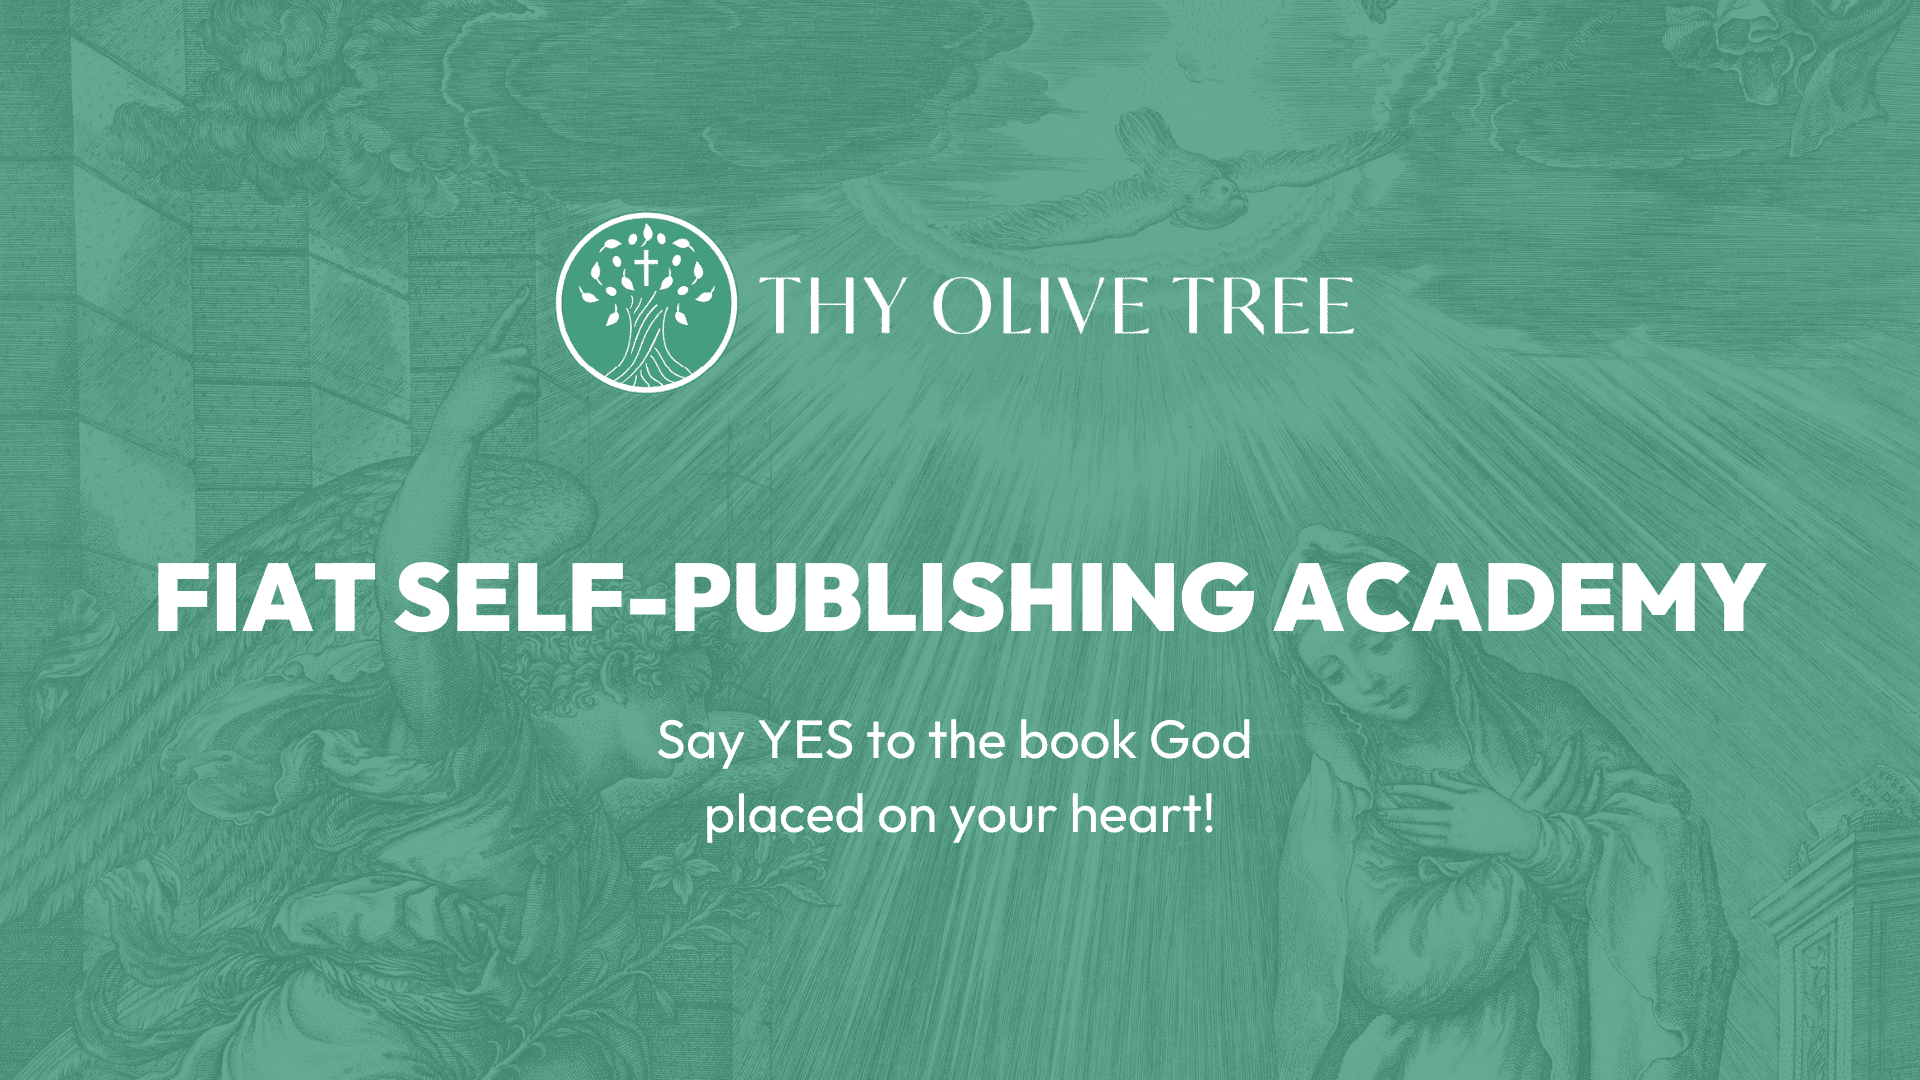 Fiat Self-Publishing Academy is Live! Promoting courses and events for Catholic authors